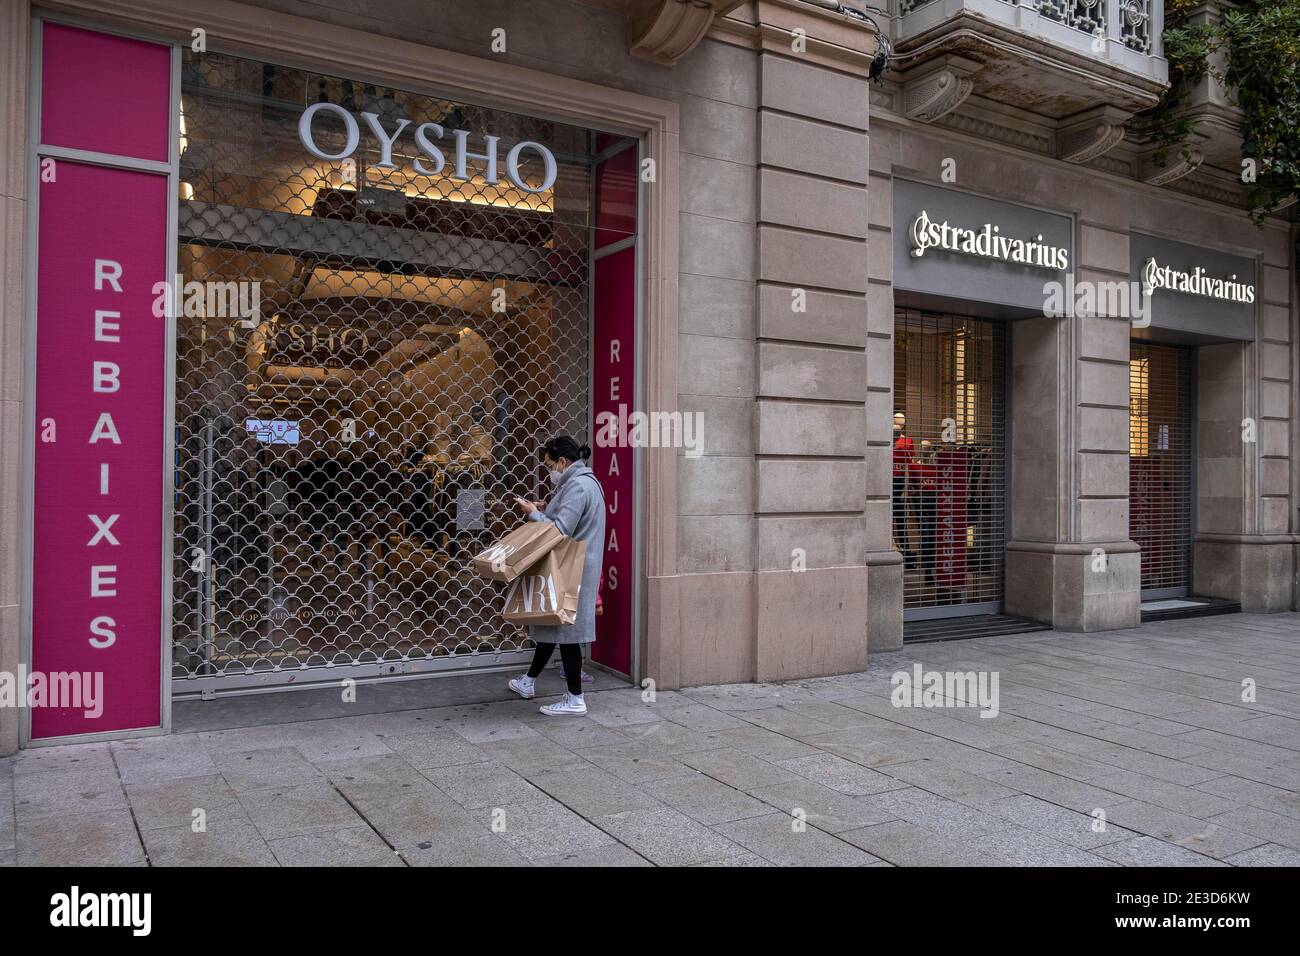 https://c8.alamy.com/comp/2E3D6KW/barcelona-spain-18th-jan-2021-a-customer-seen-waiting-at-the-door-of-the-oysho-clothing-store-in-the-portal-del-langel-shopping-area-for-the-delivery-of-purchases-made-onlinedue-to-the-increase-in-coronavirus-infections-retail-stores-in-barcelona-with-more-than-400-m2-continue-to-apply-mandatory-regulations-for-customer-capacity-and-restricted-business-hours-remaining-completely-closed-during-the-weekend-credit-sopa-images-limitedalamy-live-news-2E3D6KW.jpg